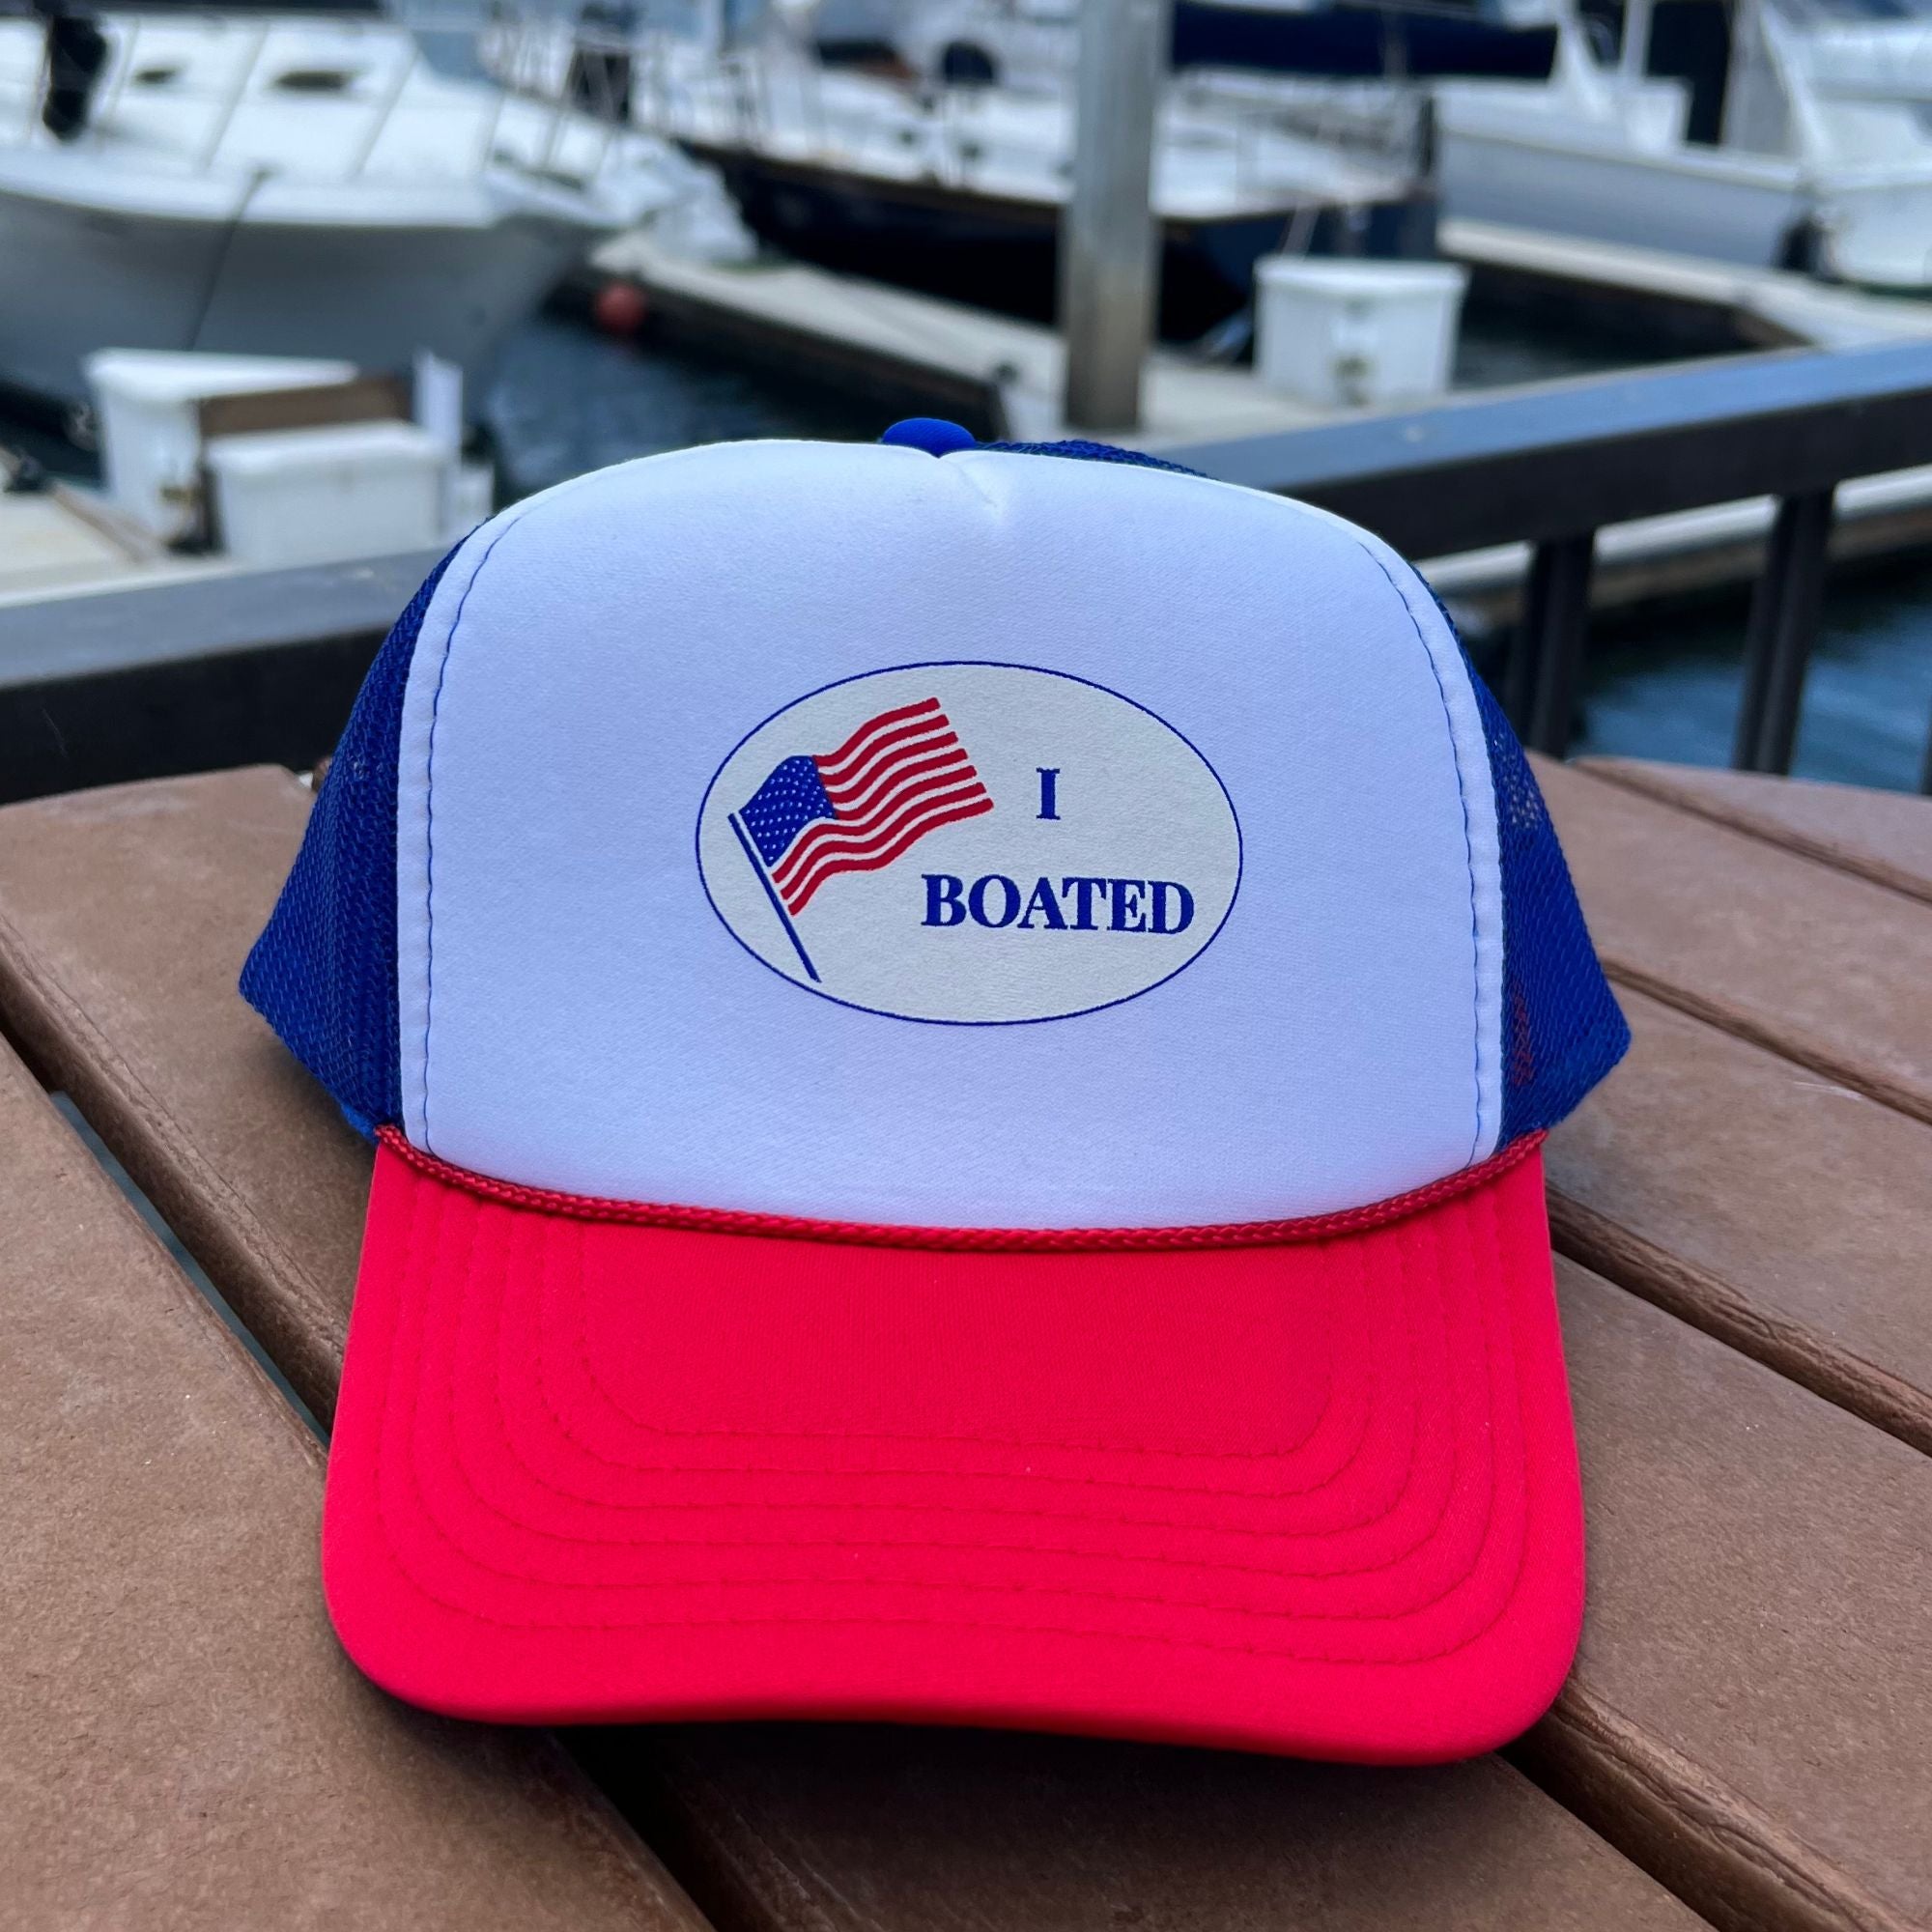 Cheers Beaches Accessories I Boated Trucker Hat: Red, White & Blue